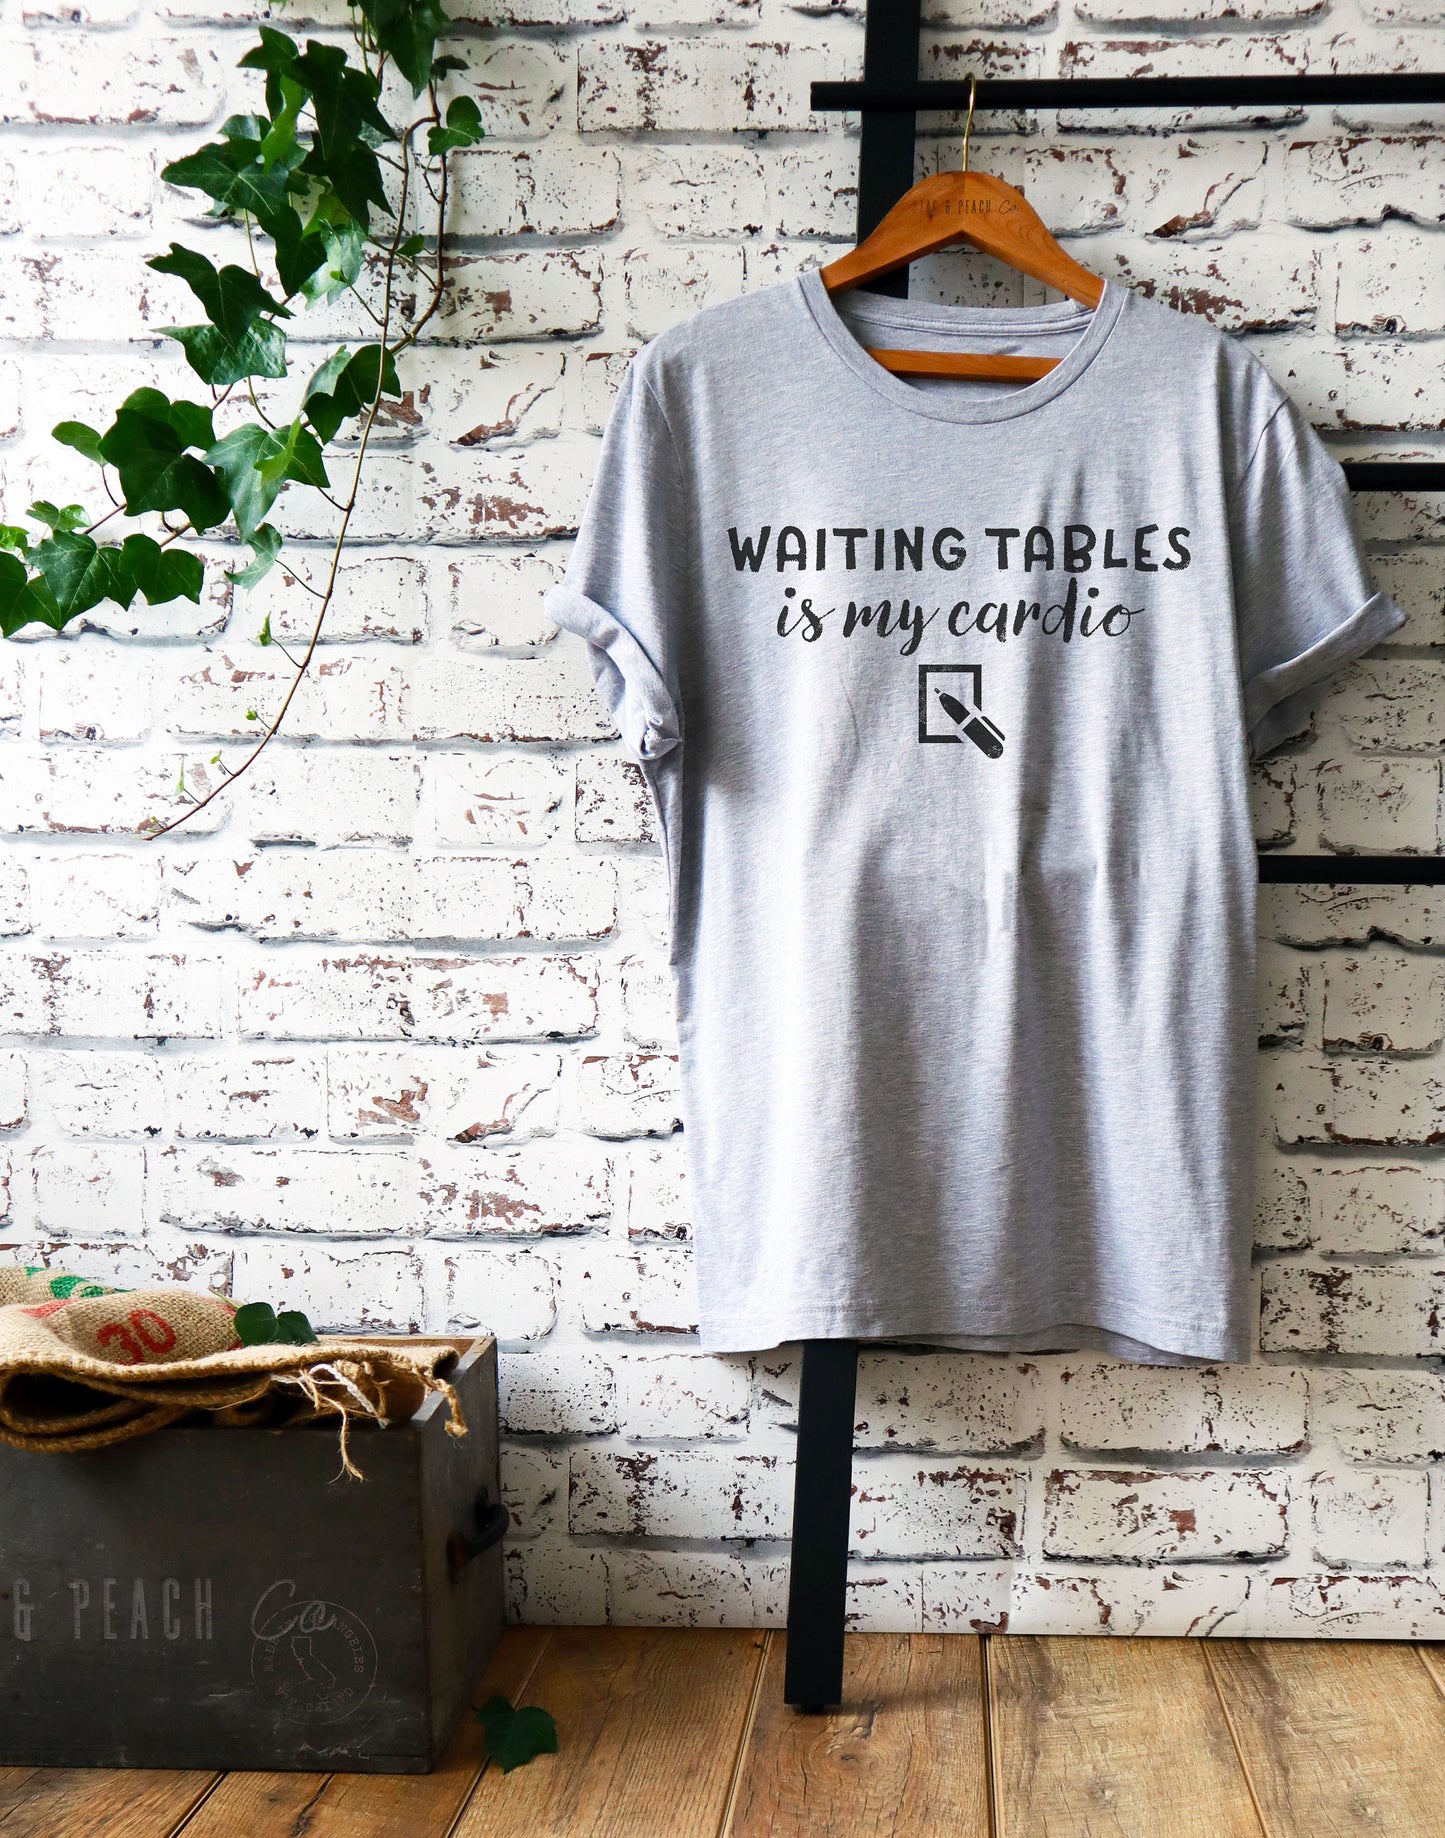 Waiting Tables Is My Cardio Unisex Shirt - Waitress Shirt, Waitress Gift, Waiter Shirt, Gift For Waitress, Bartender Shirt, Bartending